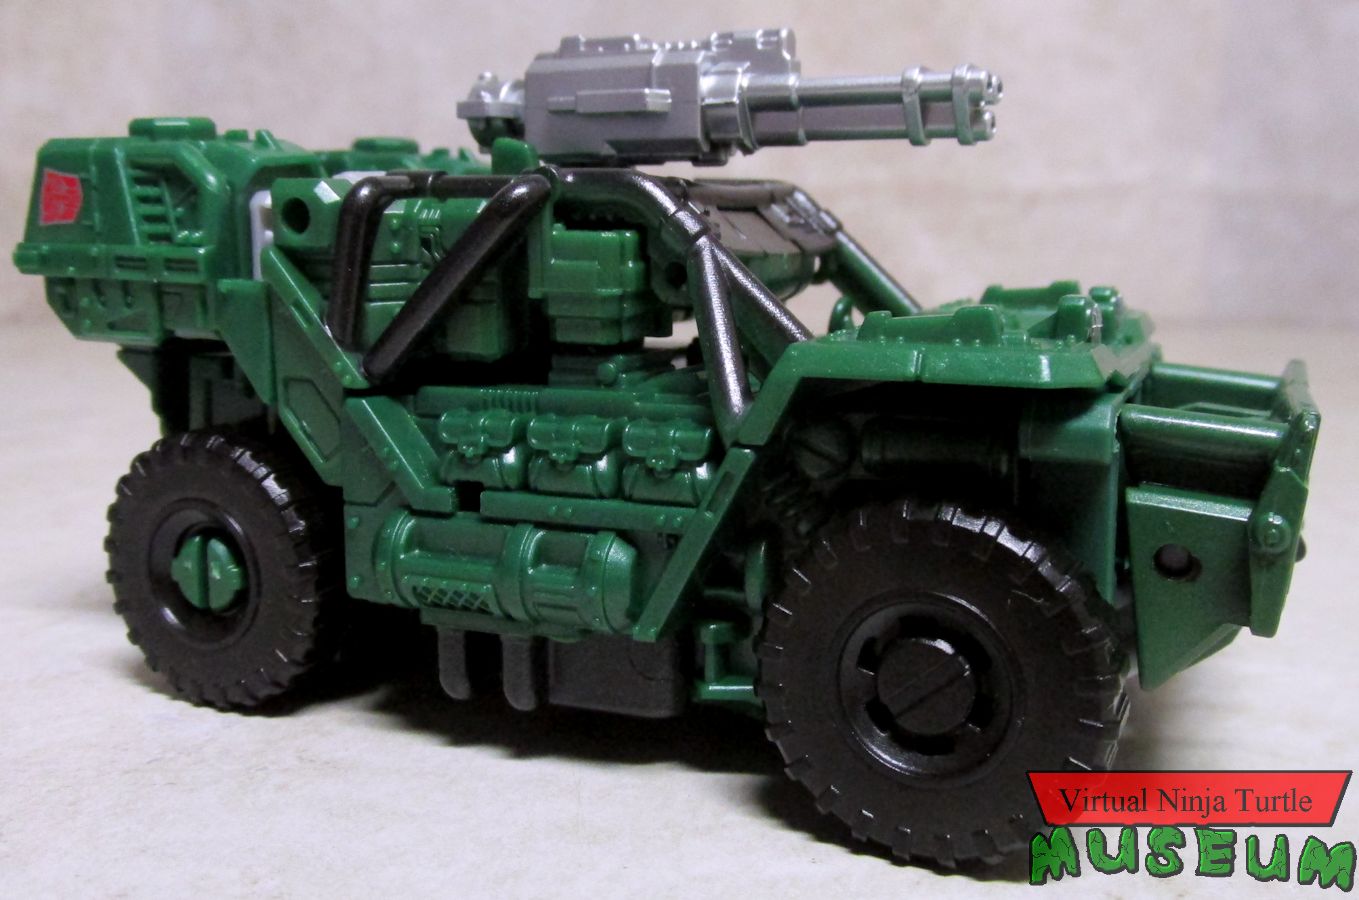 Hound vehicle mode side view